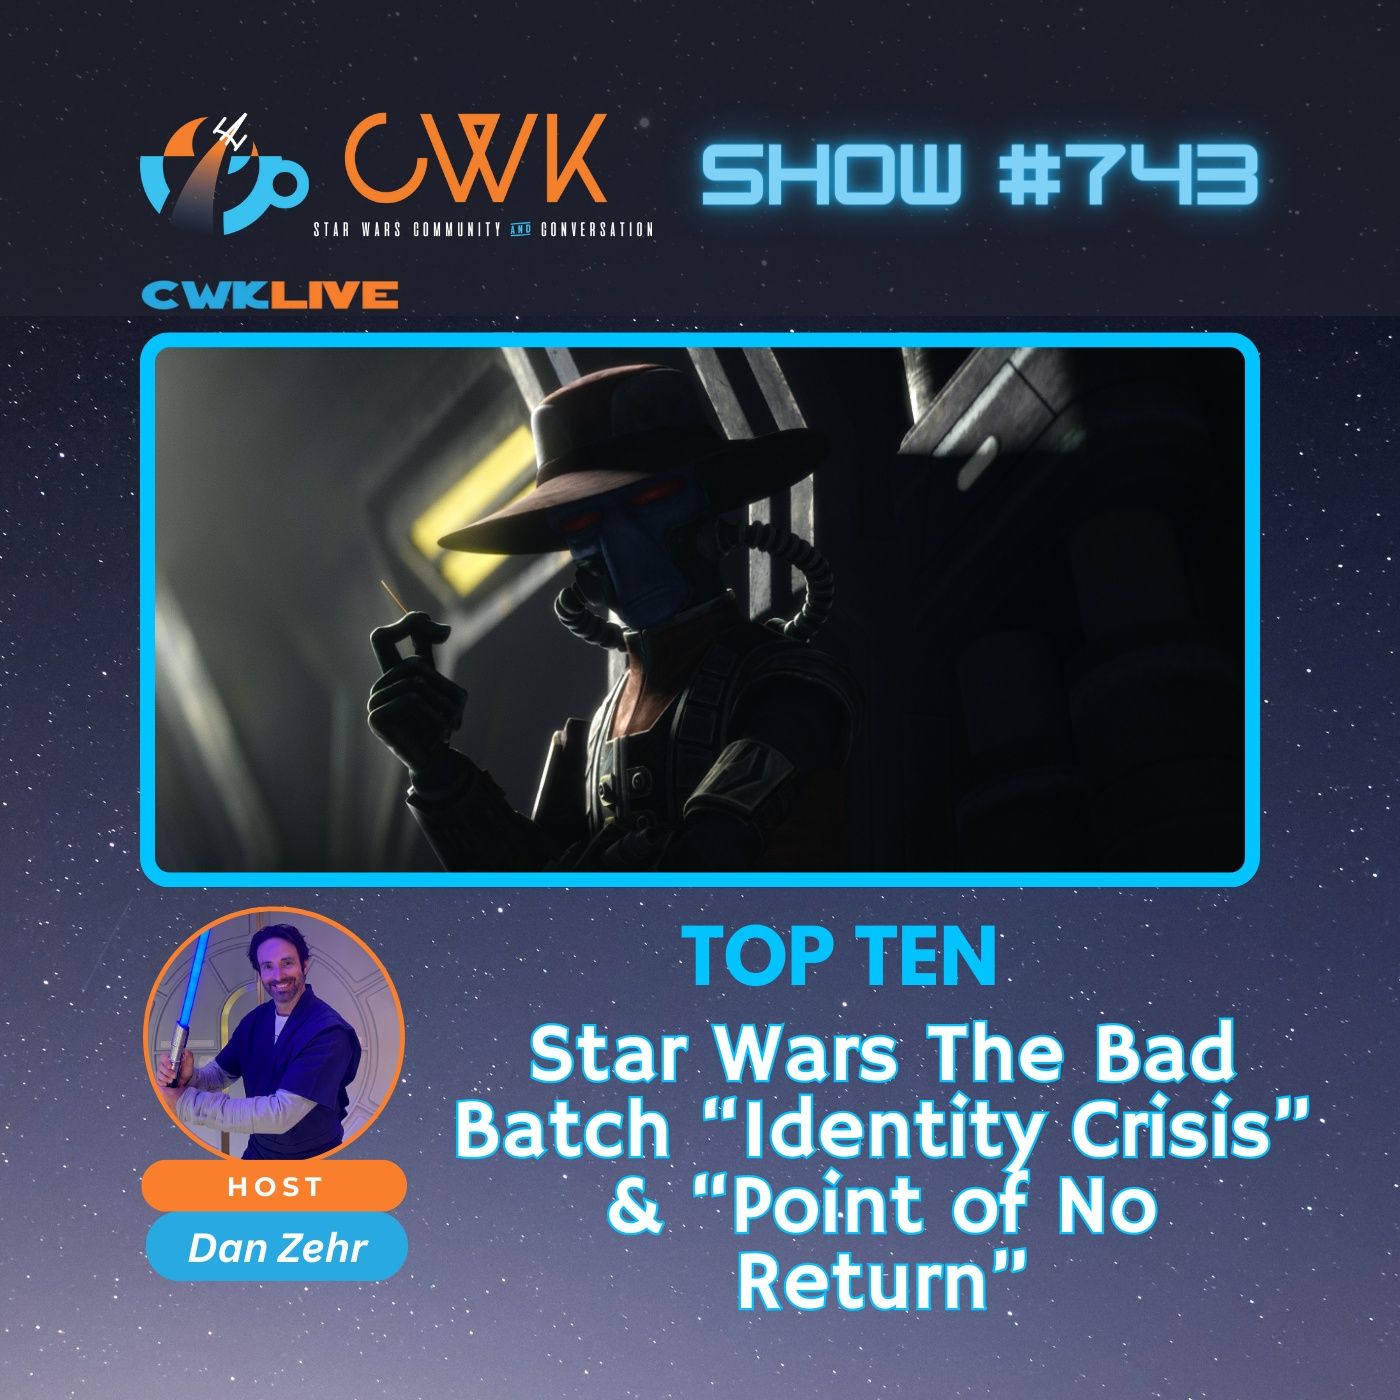 CWK Show #743 LIVE: Top Ten Moments from The Bad Batch ”Identity Crisis” & ”Point of No Return”